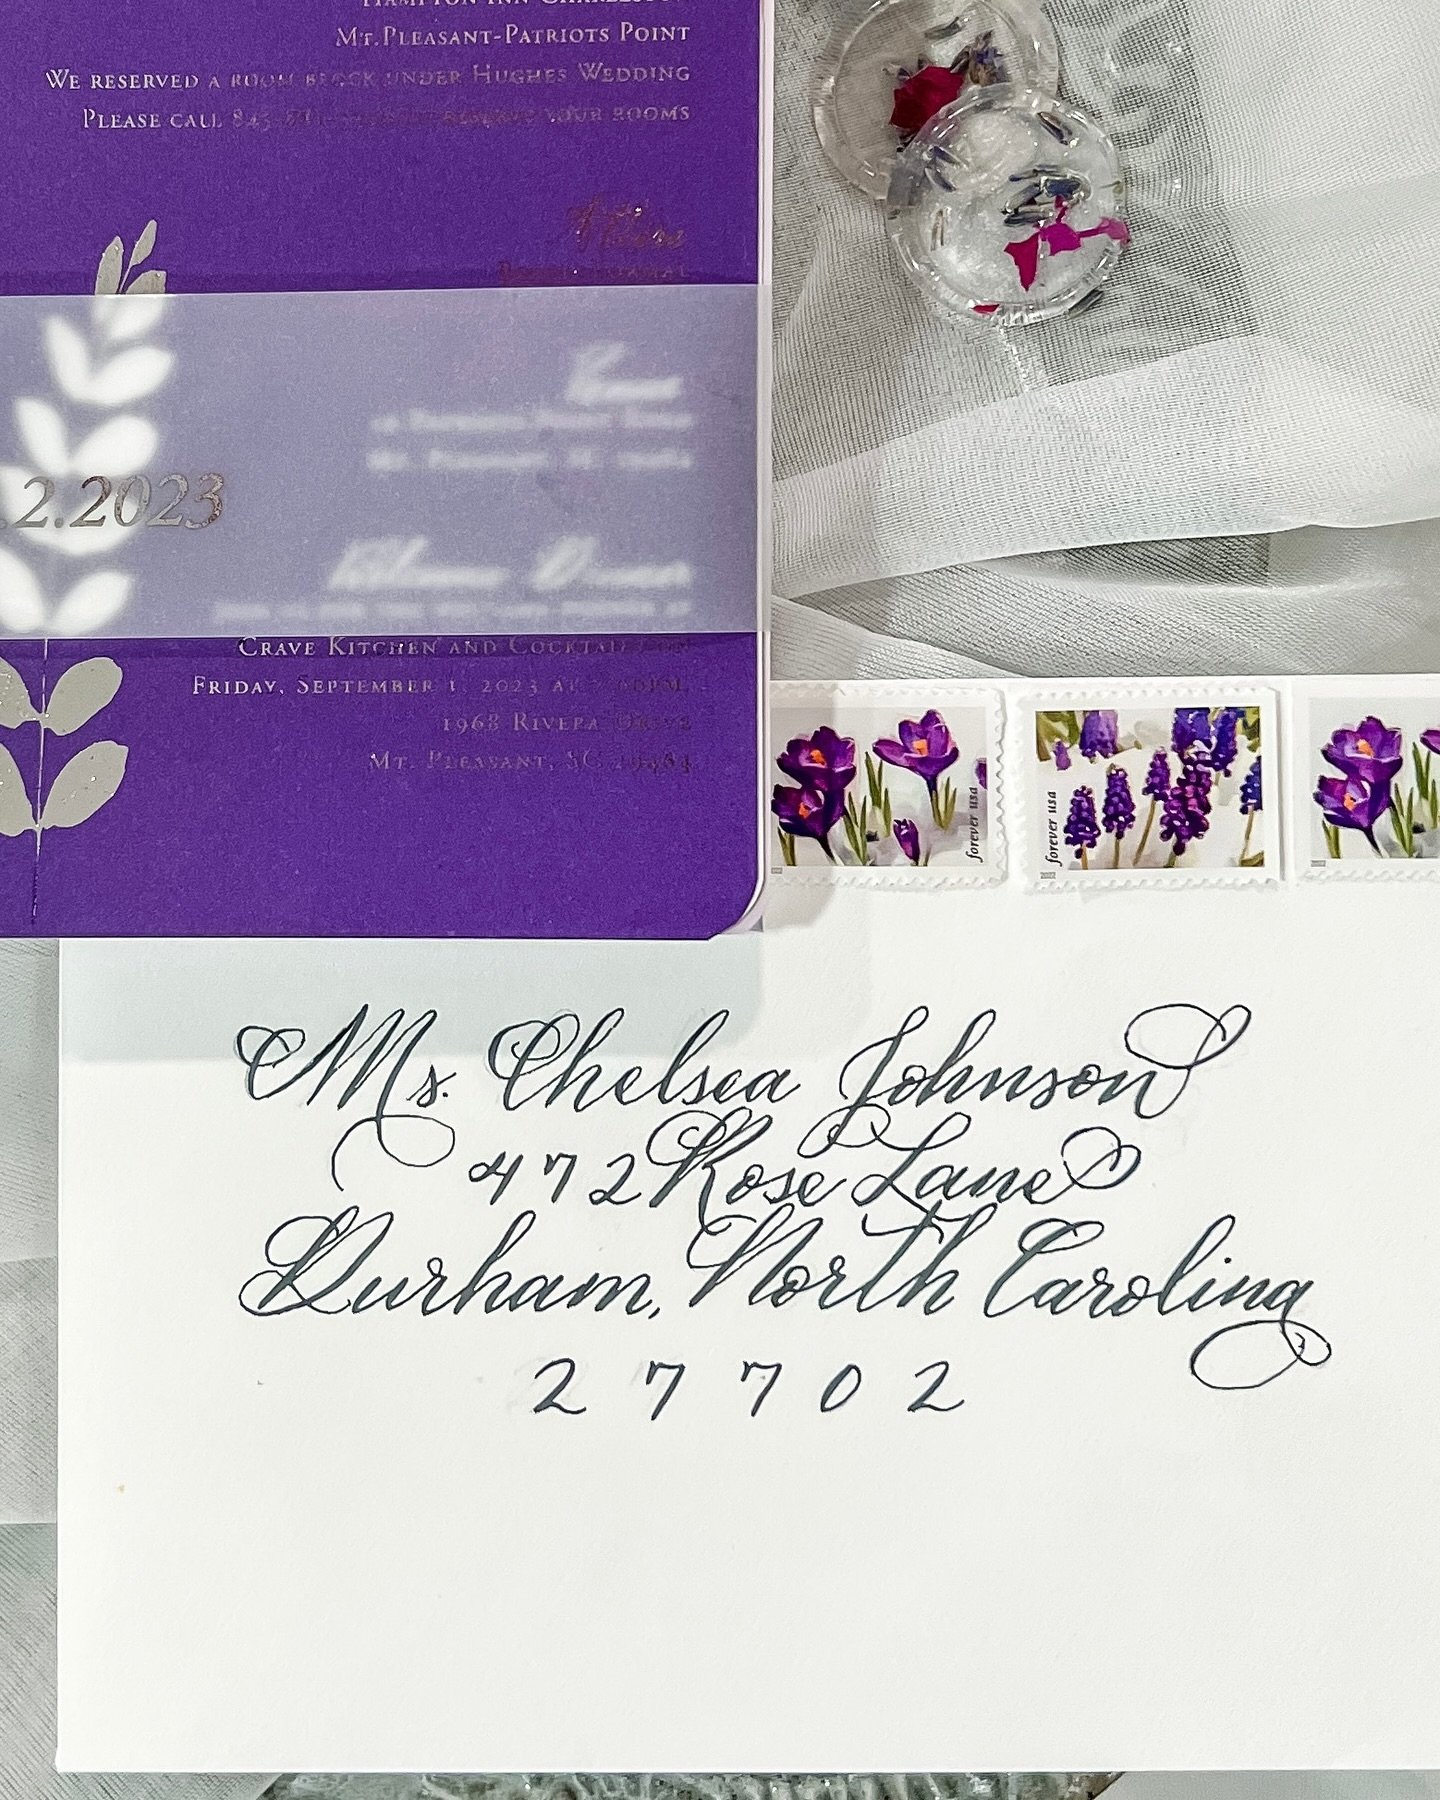 Envelope addressing: the first impression that sets the tone for your event. It adds a timeless touch and personalization, making each invitation feel like a cherished gift. Beyond aesthetics, it ensures your guests feel valued and excited to RSVP. I